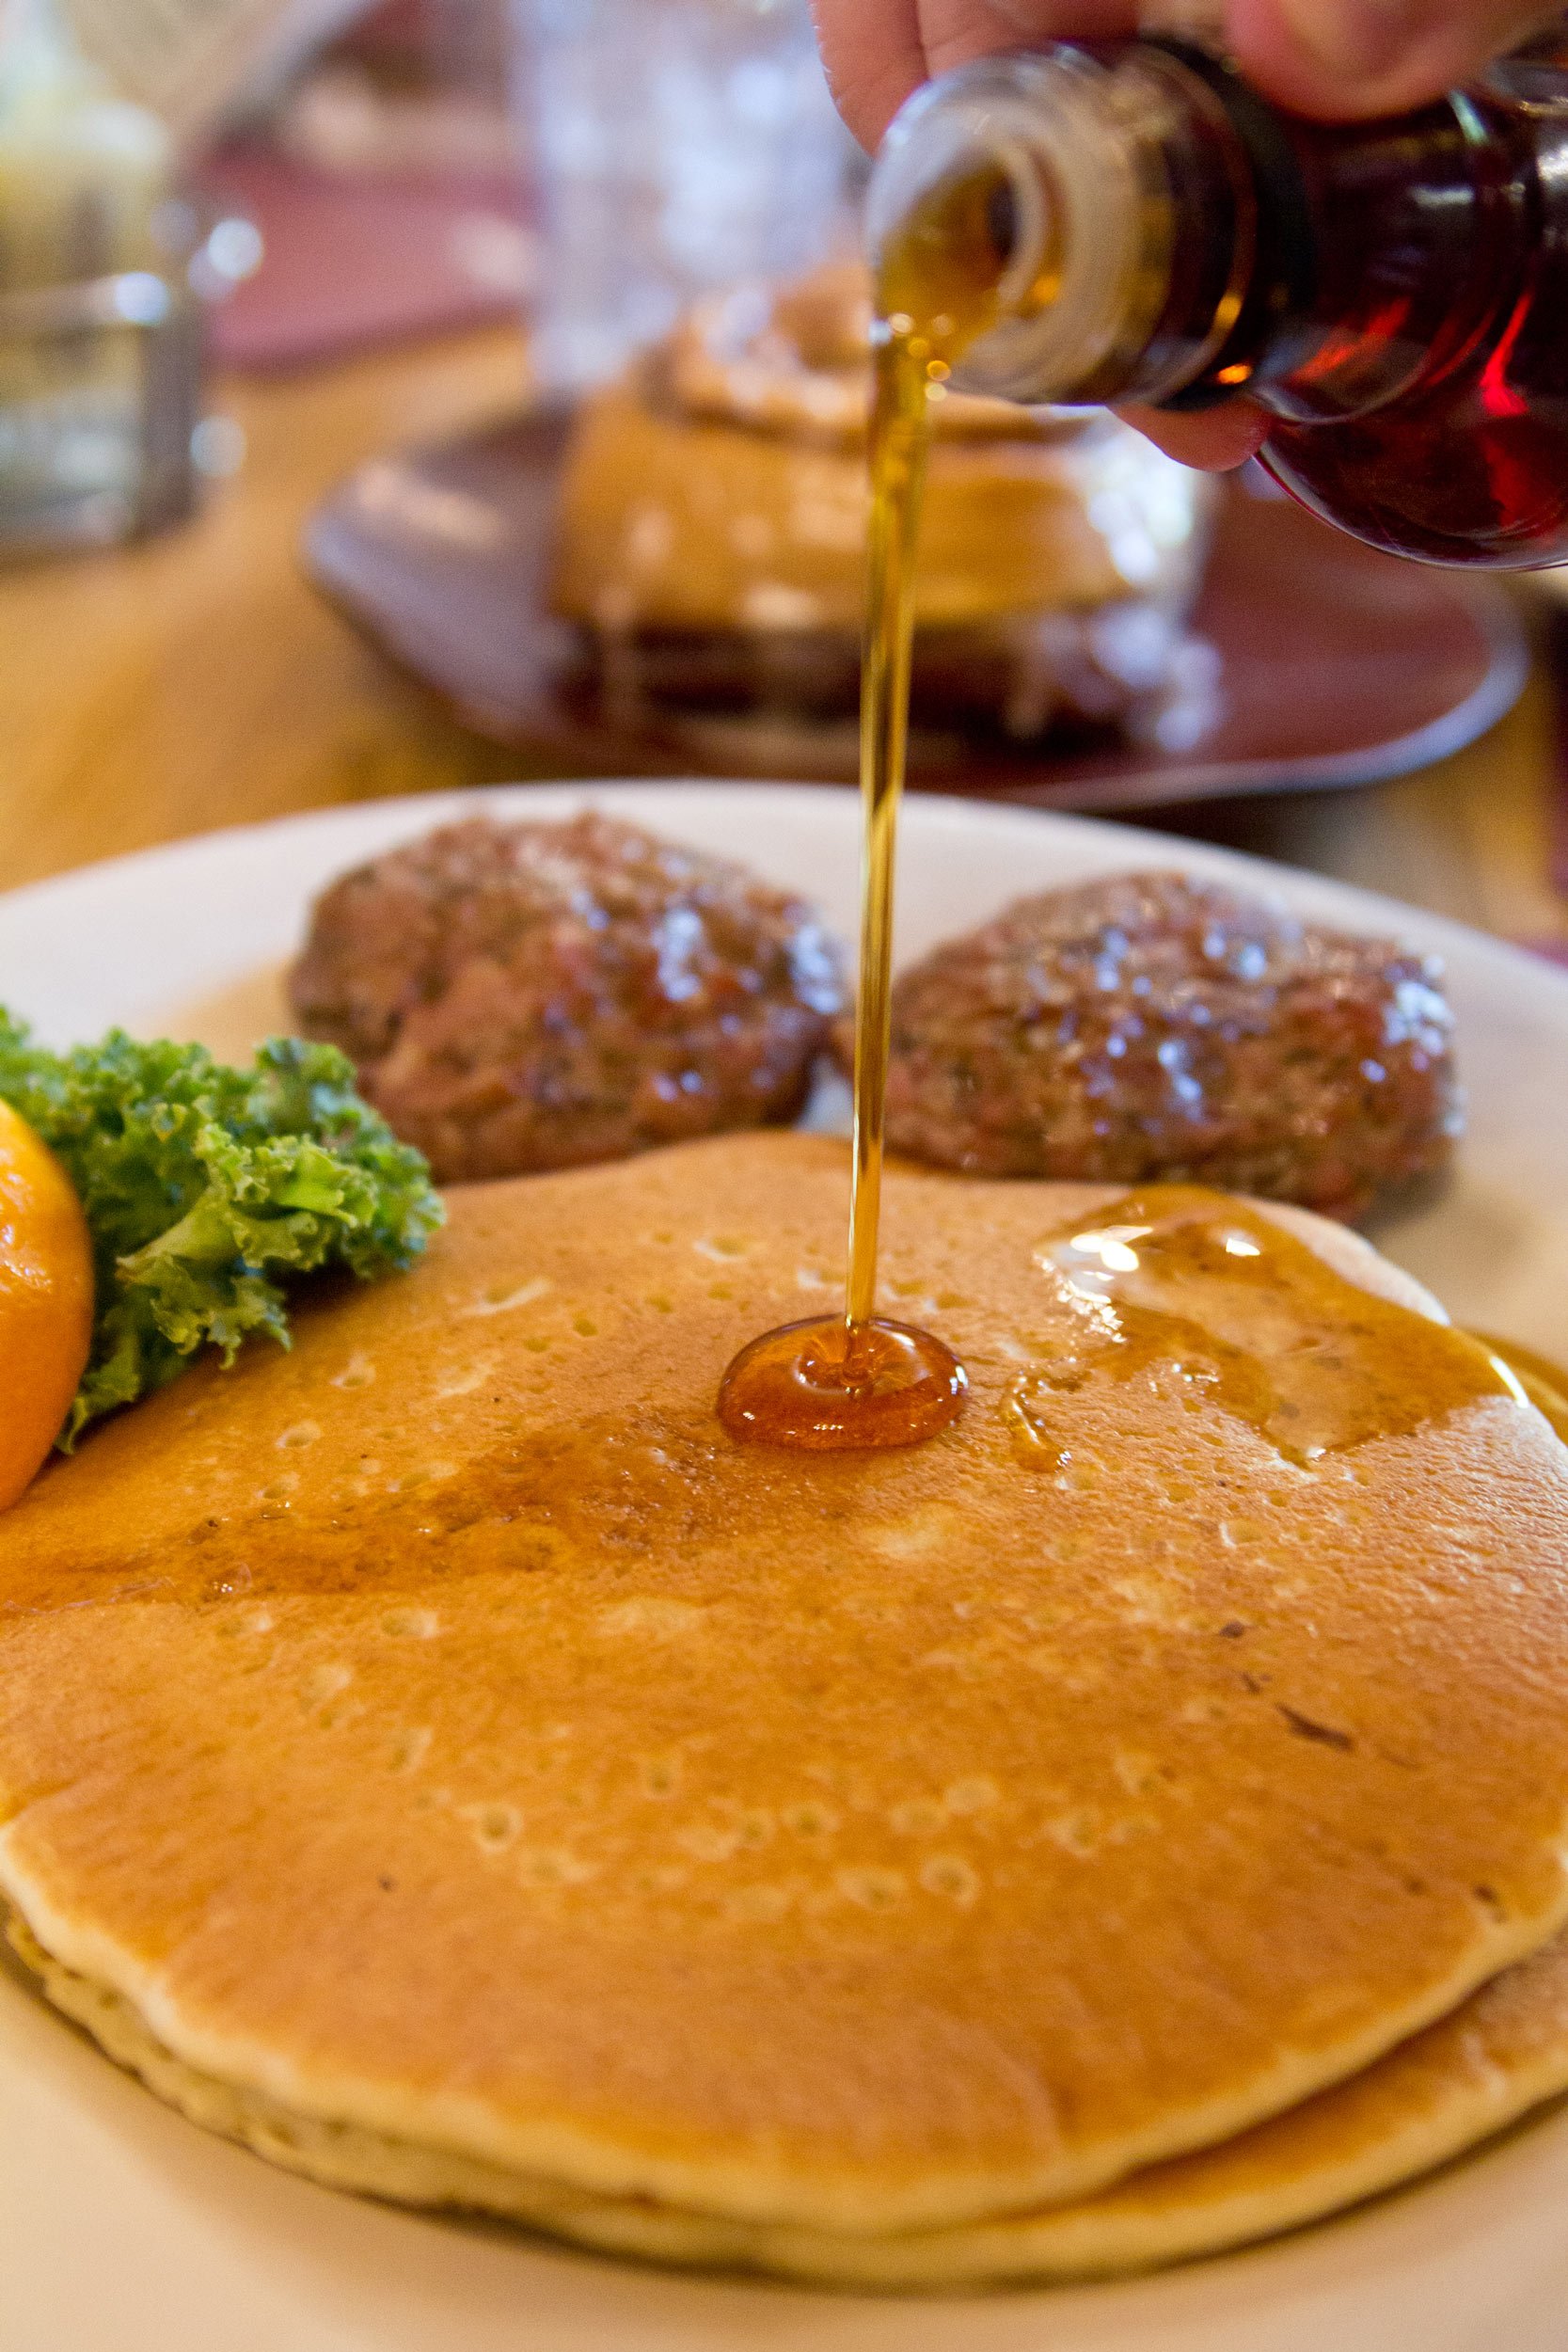 maple-syrup-and-pancakes-at-spragues-maple-farms